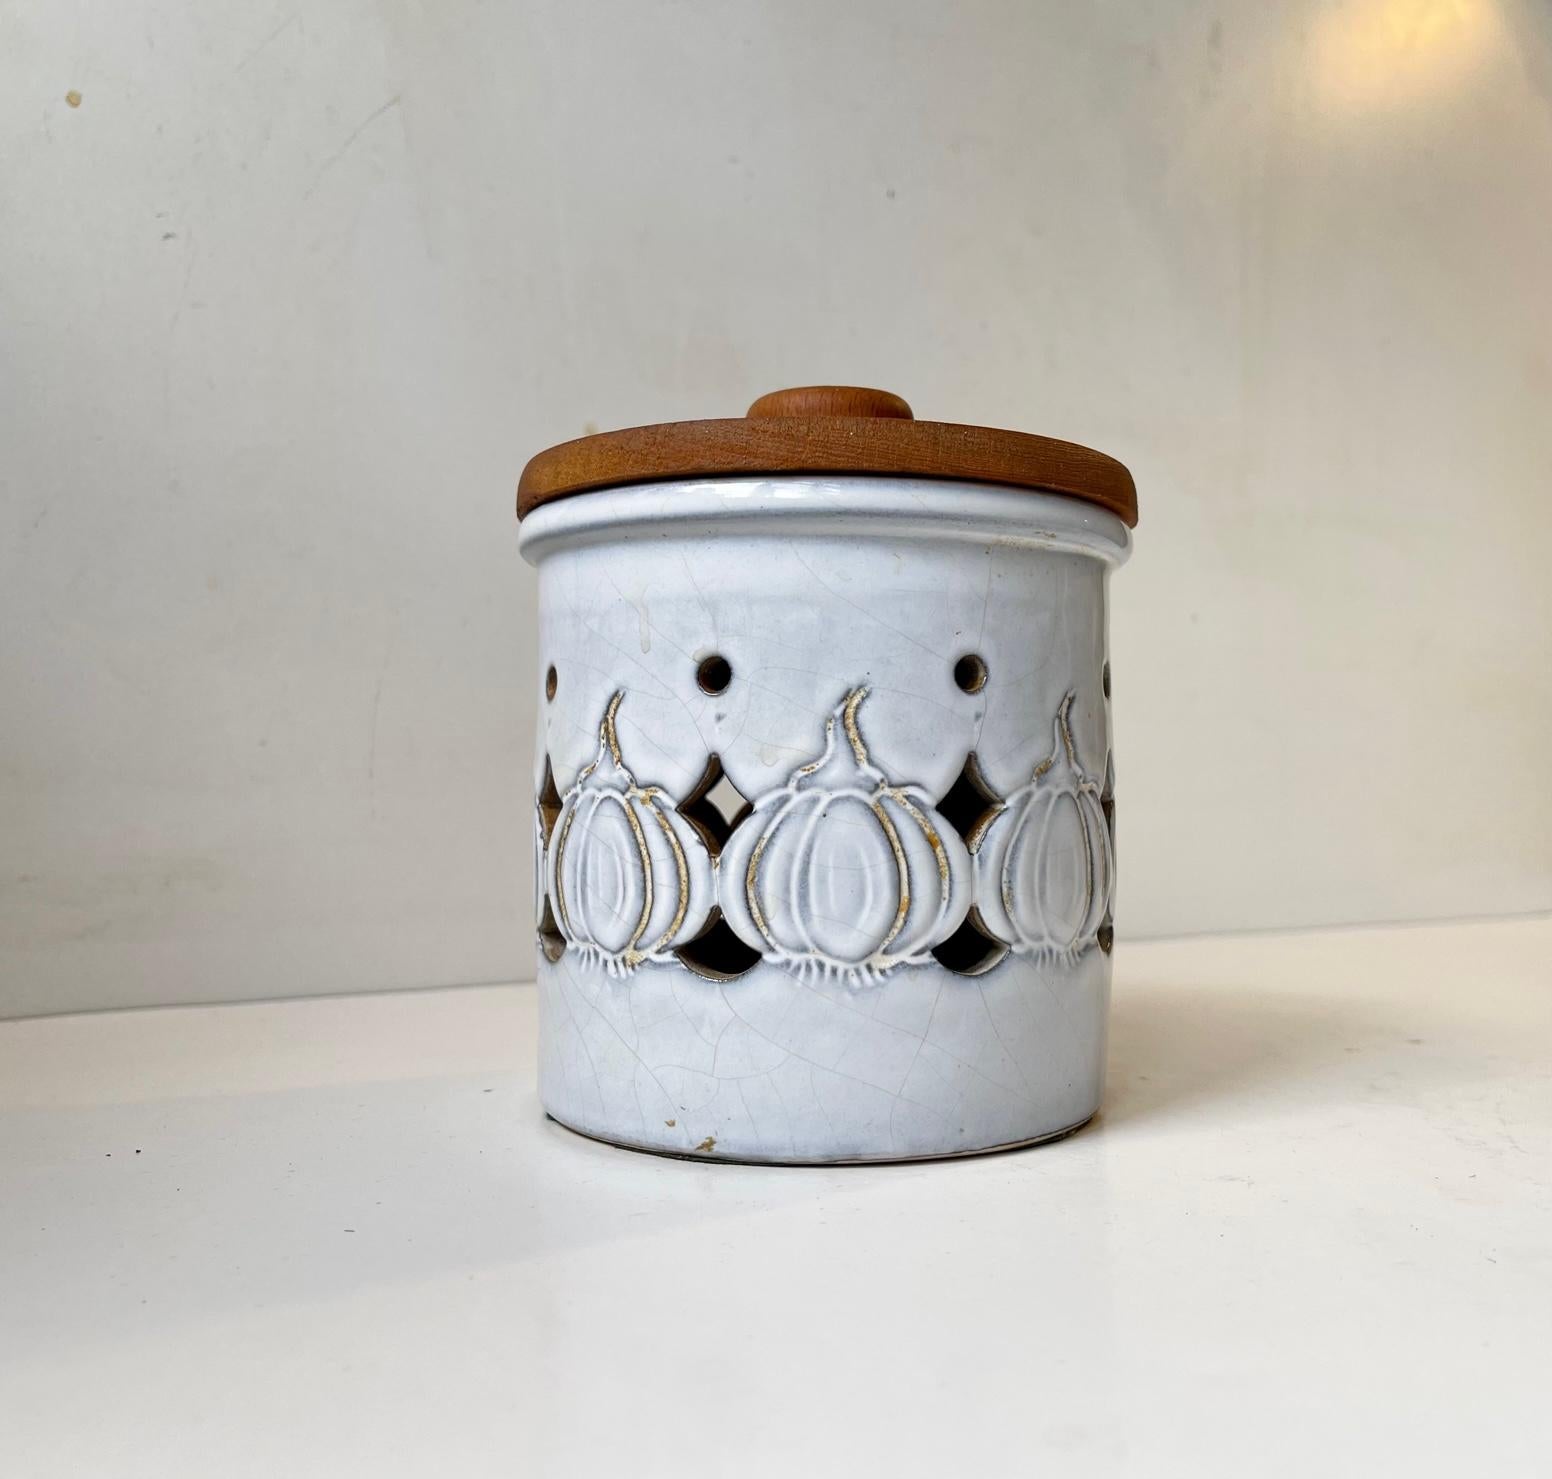 Wellmade lidded jar intended for storing garlic. Decorated in white glaze with piercings and garlics in relief. Label from Frands V. Measurements: H: 14 cm, D: 12 cm.